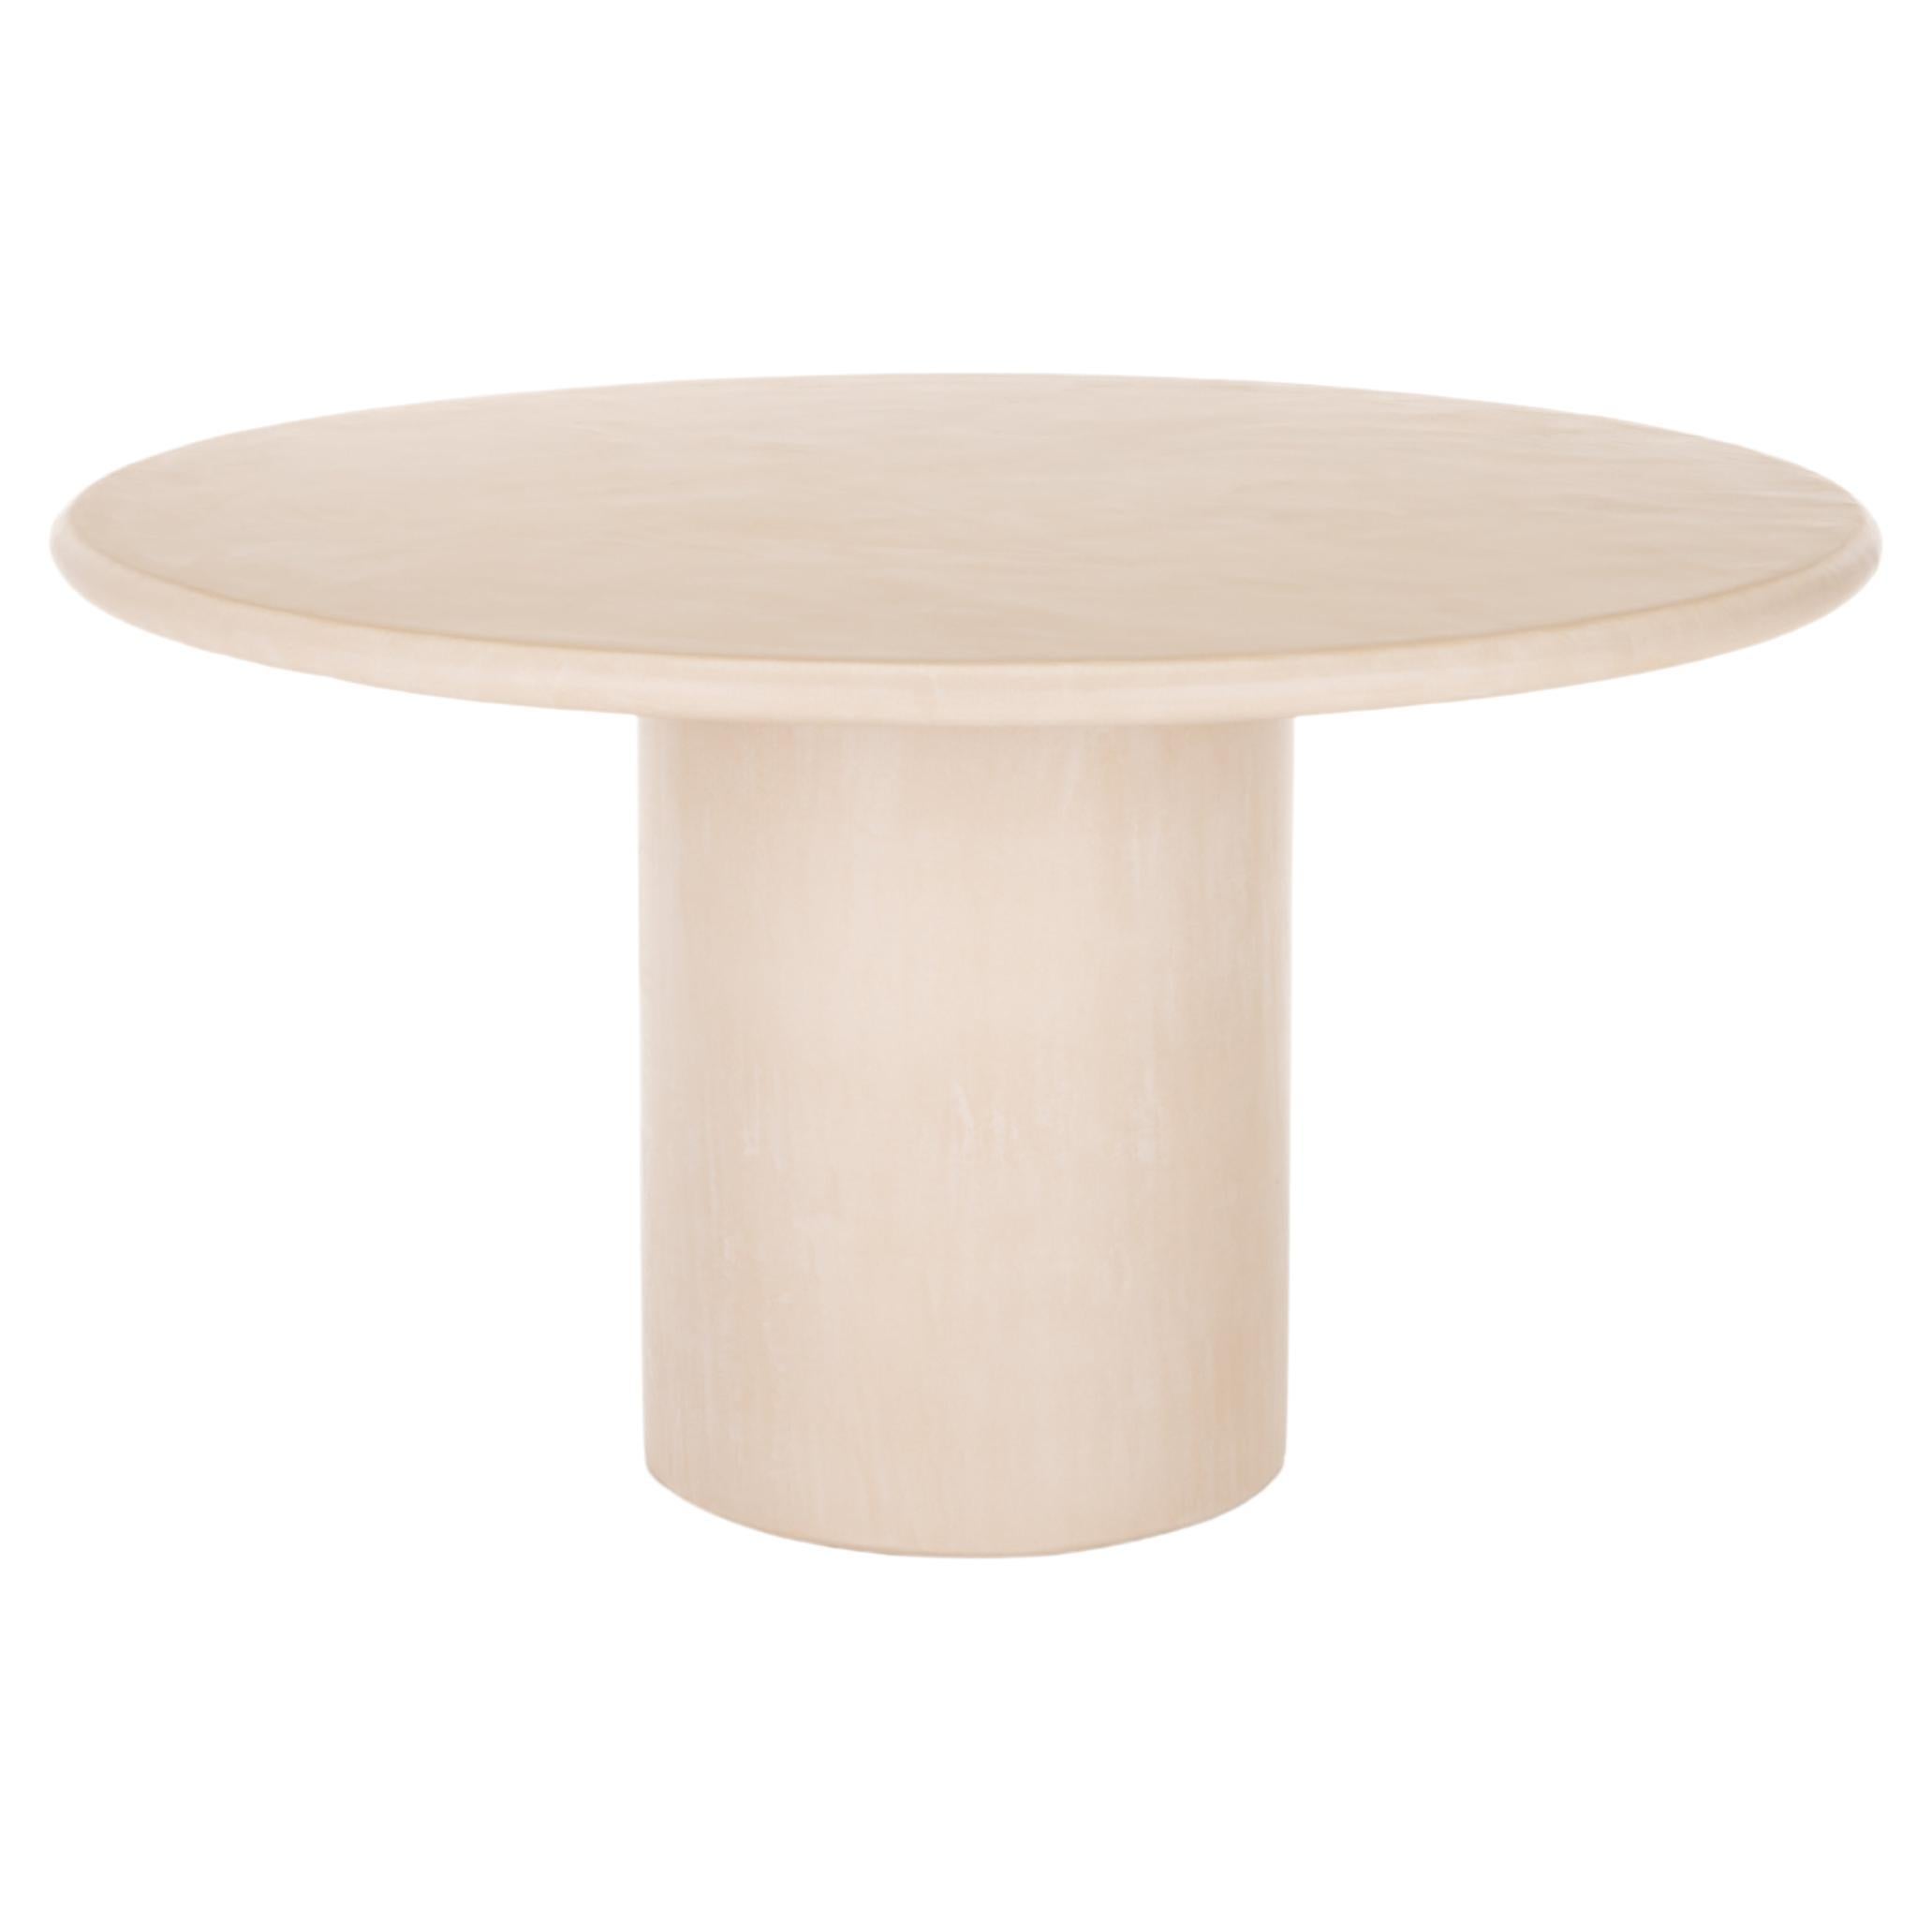 Contemporary Round Natural Plaster "Column" Table 140cm by Isabelle Beaumont For Sale